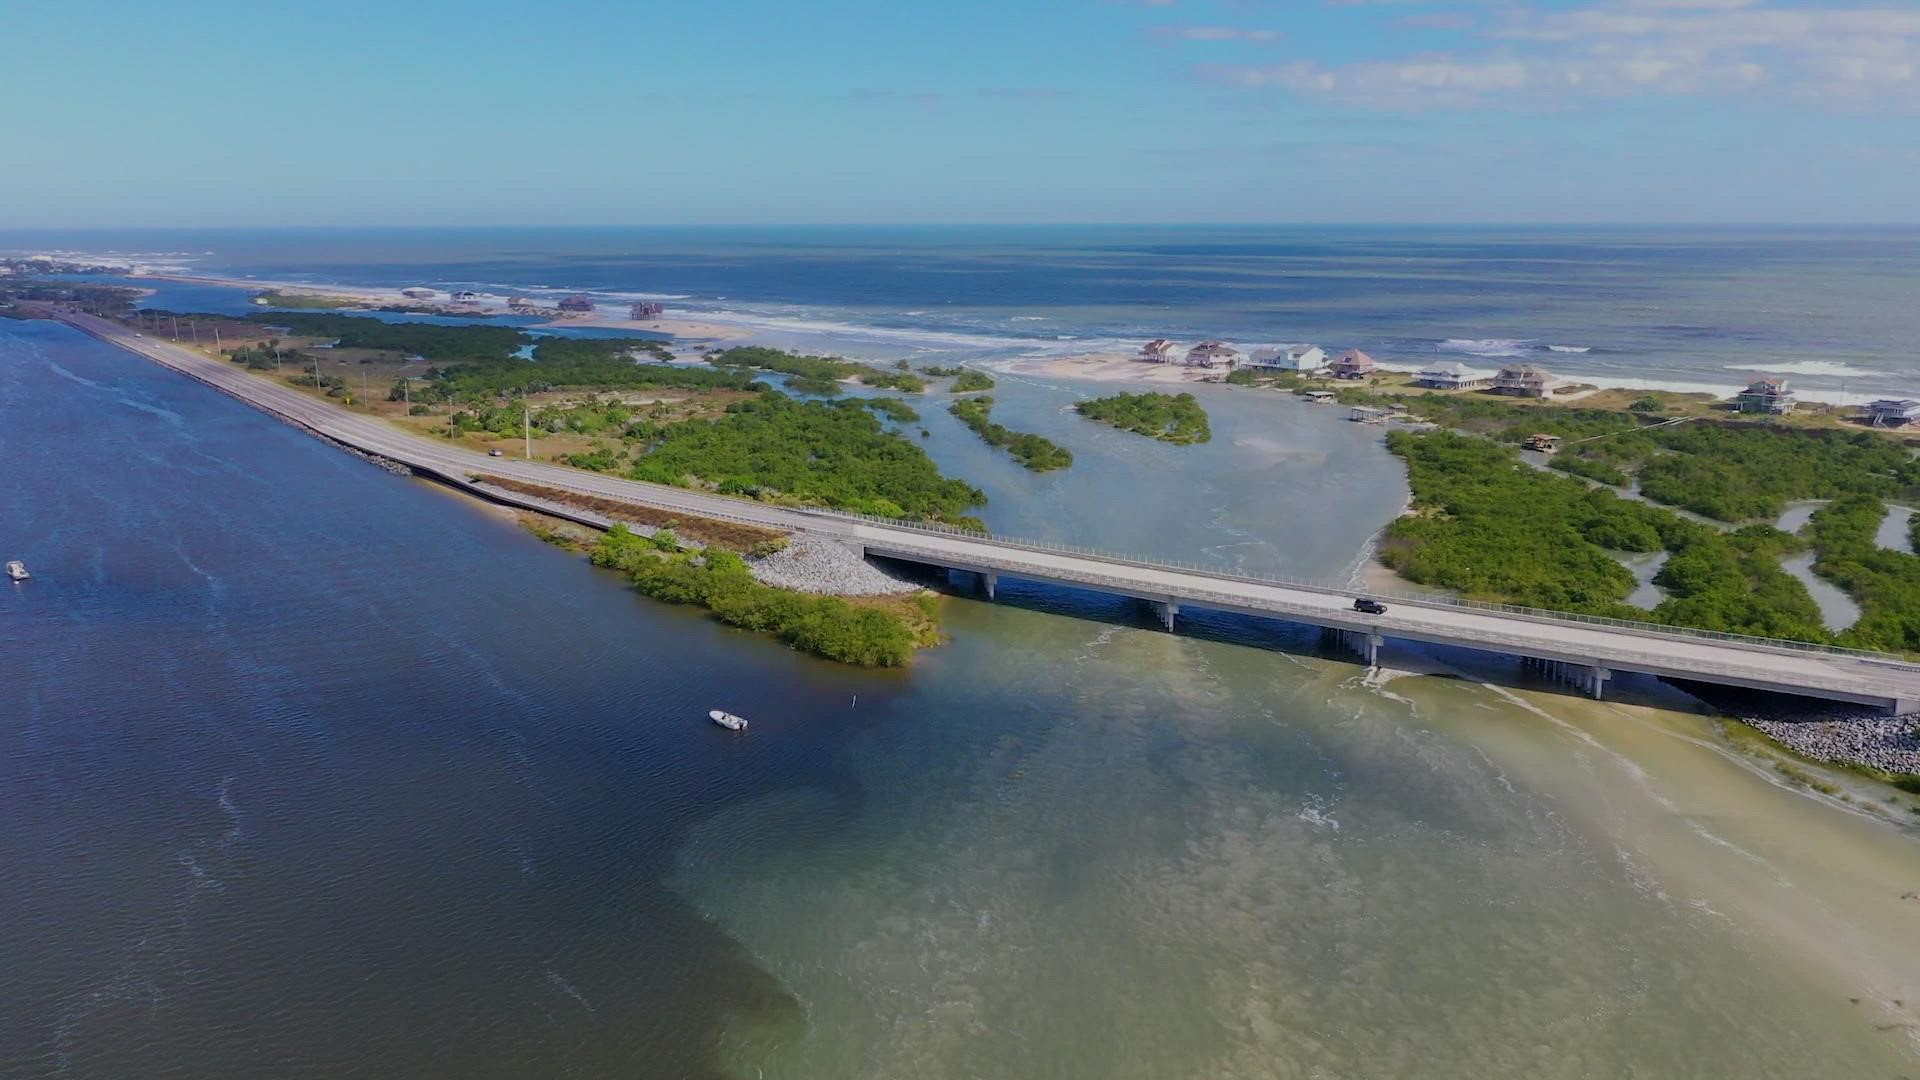 Drone footage shows homes along the beach between Matanzas Inlet and Marineland nearly surrounded by water after a breach in St. Johns County.